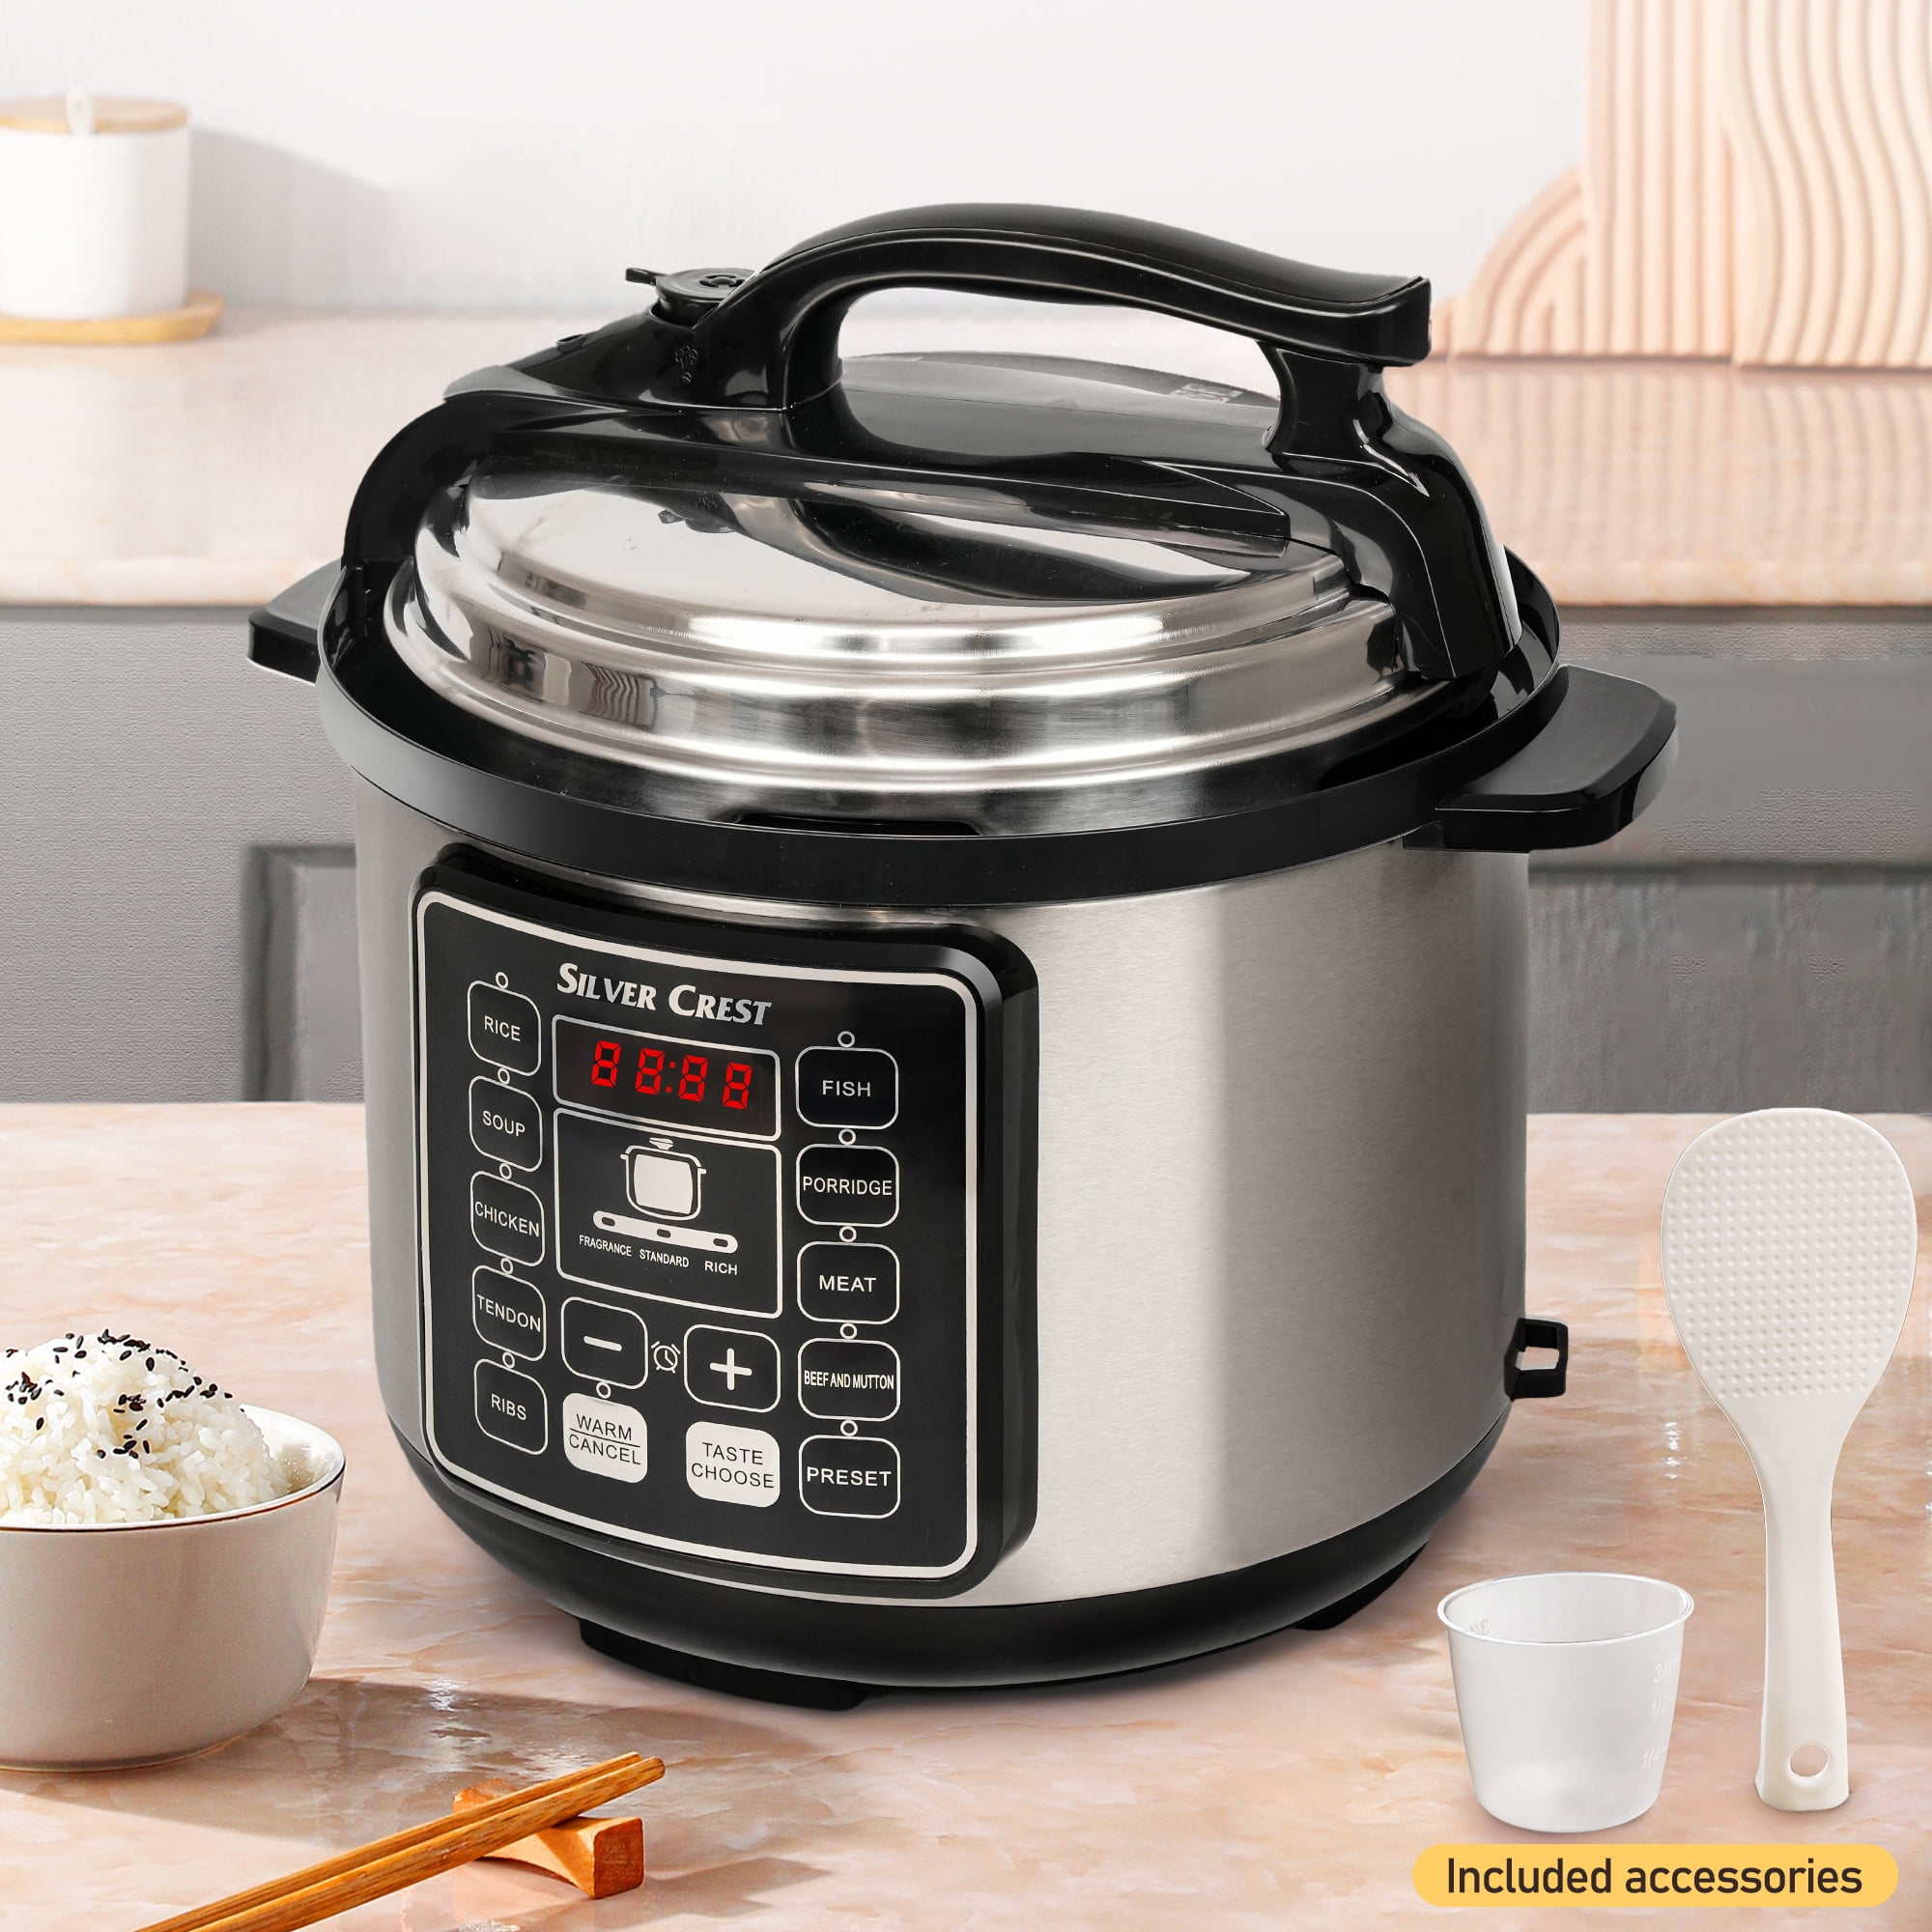 KAPAS Smart Electric Pressure Cooker, 6.4 Qt 10-in-1 Multi-Use Slow Cooker  with Cooking Accessory for Delicous Food Rice, Multigrain, Porridge,  Meat/Stew, Yogurt, Cake and Warm, Steam, Saute 